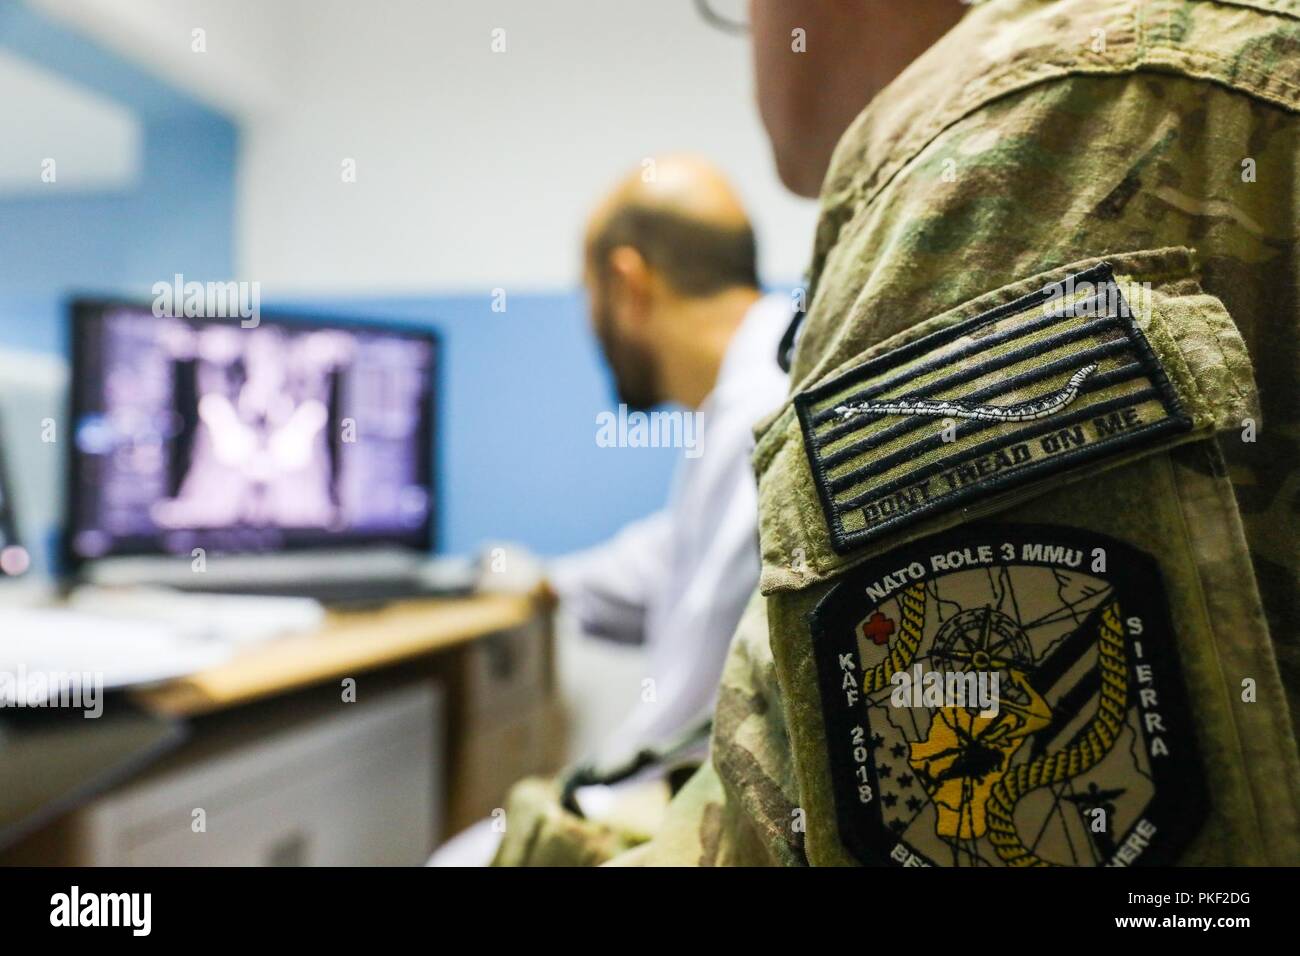 KANDAHAR PROVINCE, Afghanistan (August 5, 2018) -- U.S. Navy Lt. Cdr. Justin S. Clark, radiology technician for Kandahar Airfield NATO Role III Multinational Medical Unit, watches as his Afghan radiology counterpart checks the results of an x-ray, August 5, 2018, during a medical advisory visit at Kandahar Regional Military Hospital, Camp Hero in Kandahar, Afghanistan. Staff members from the Role III conduct routine visits to KRMH to train and advice Afghan medical staff. Stock Photo